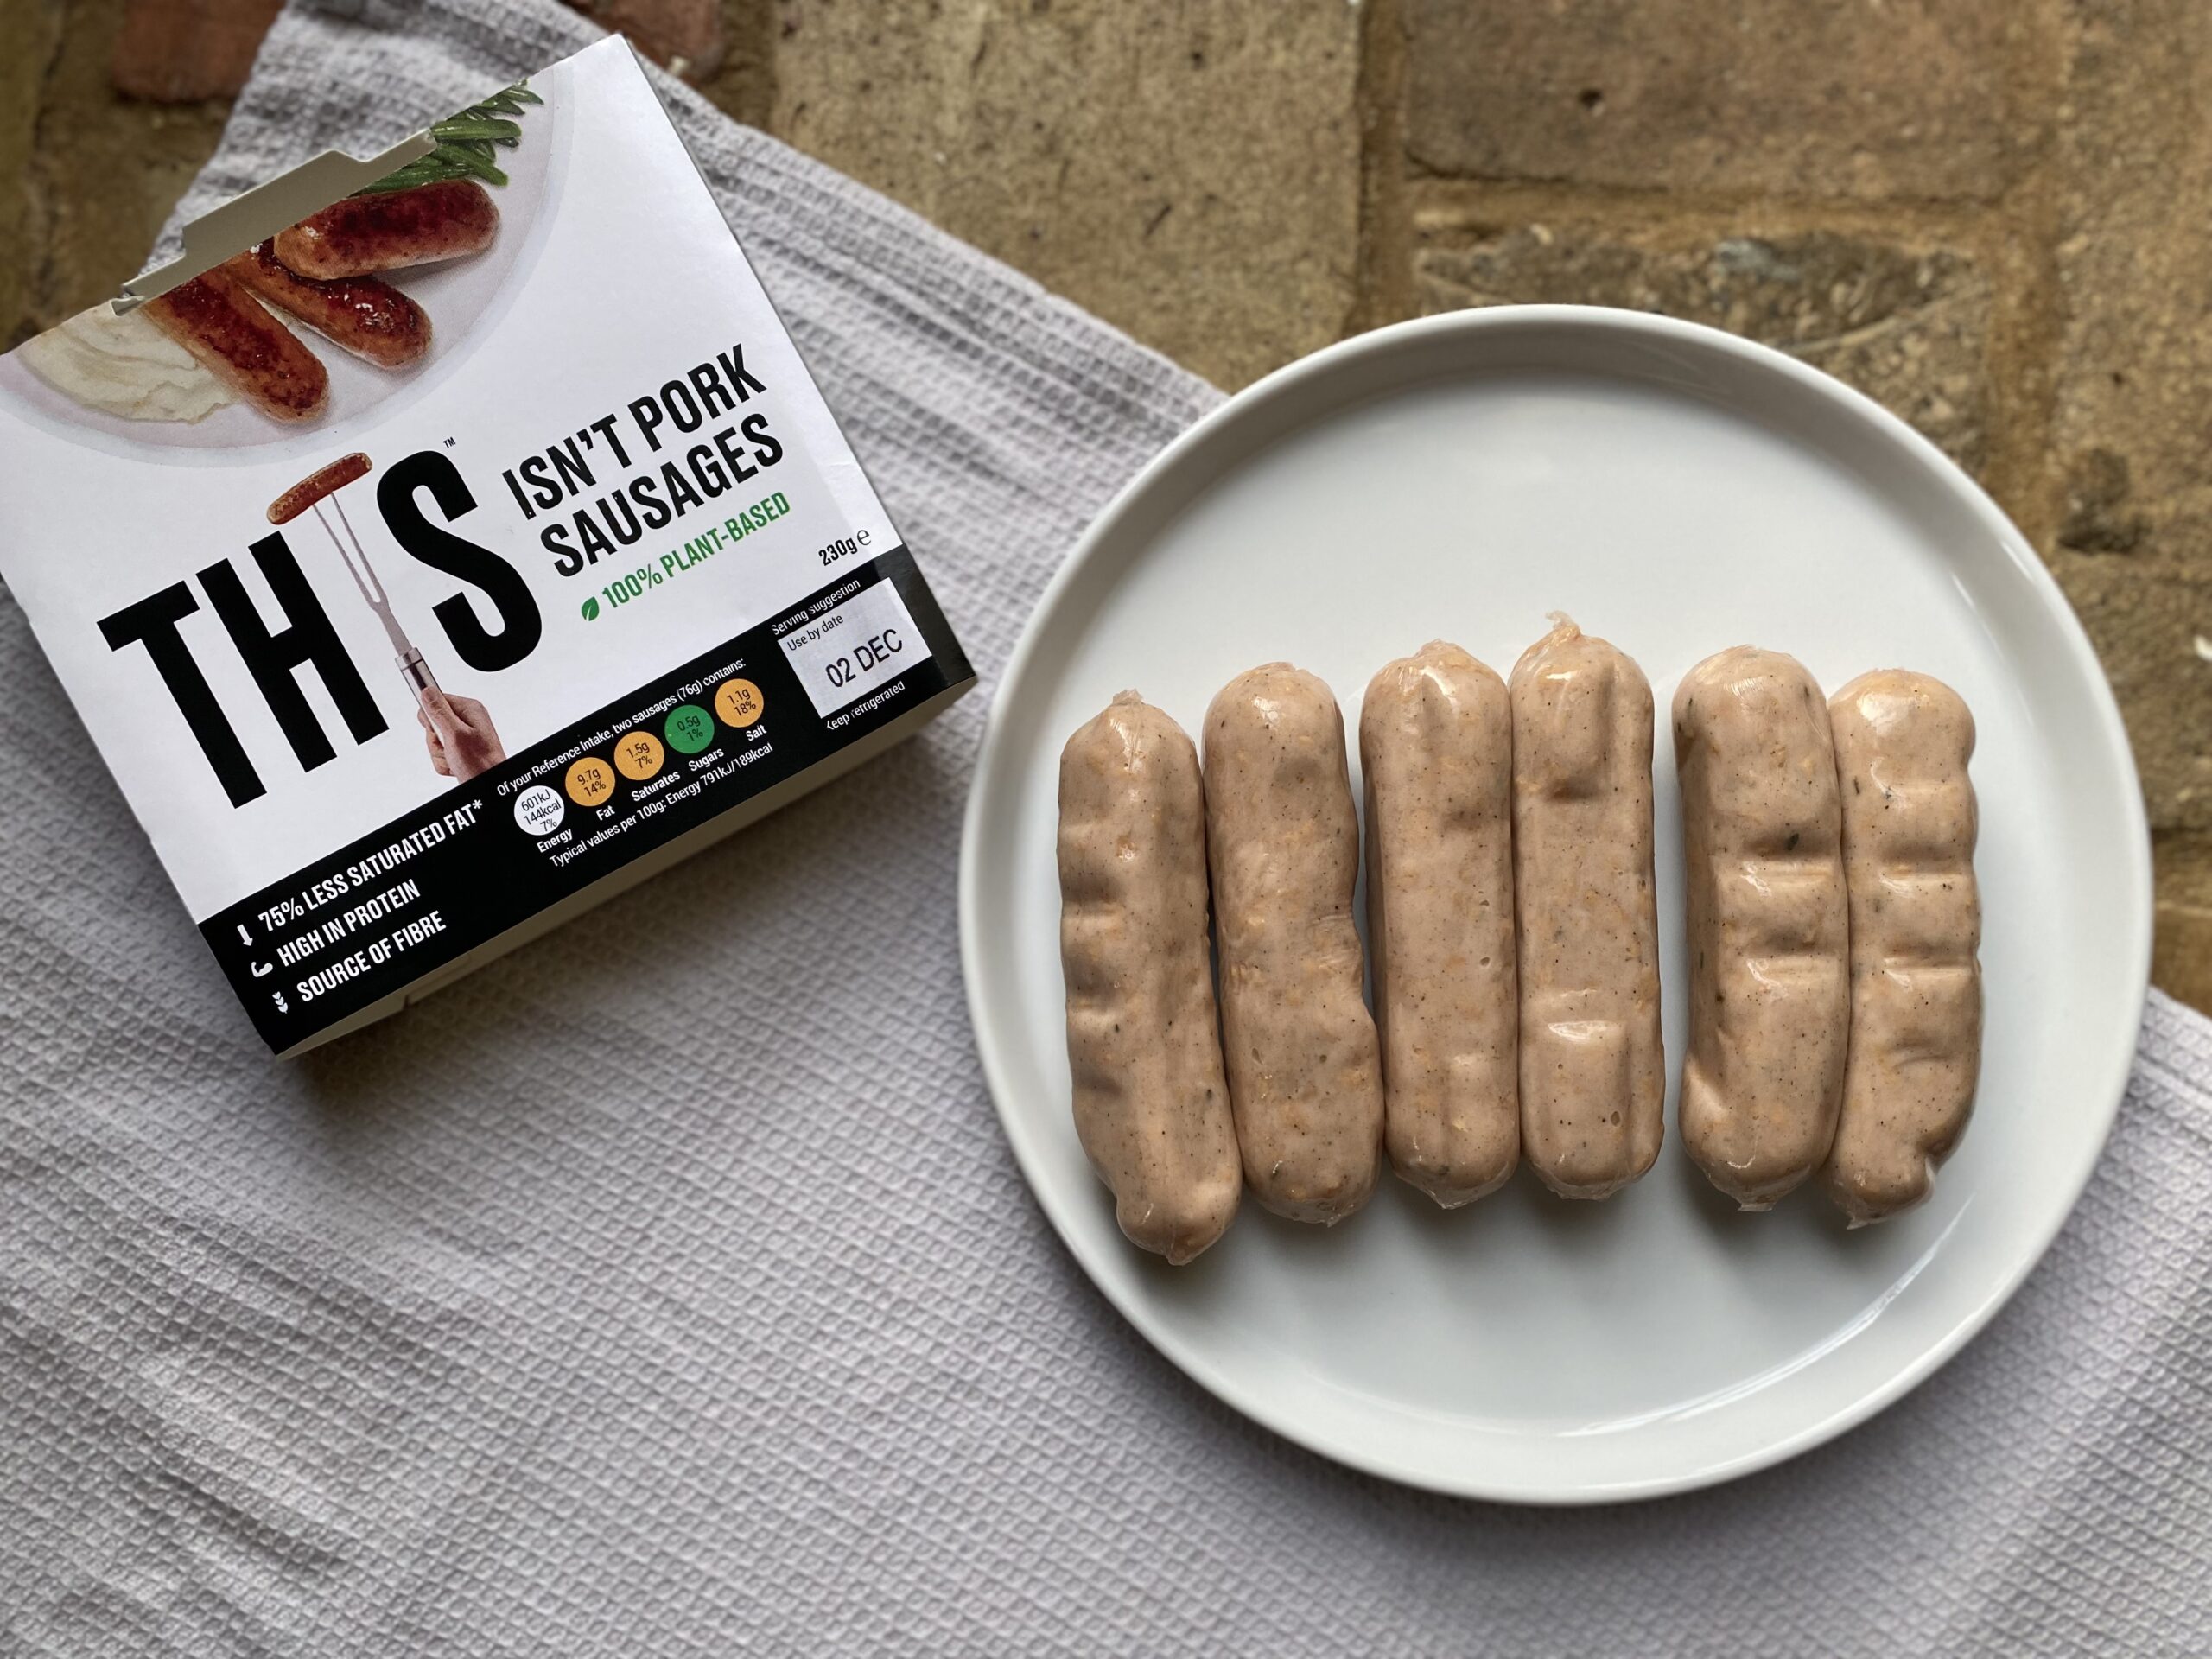 A plate of sausages for my This isn't pork sausages review